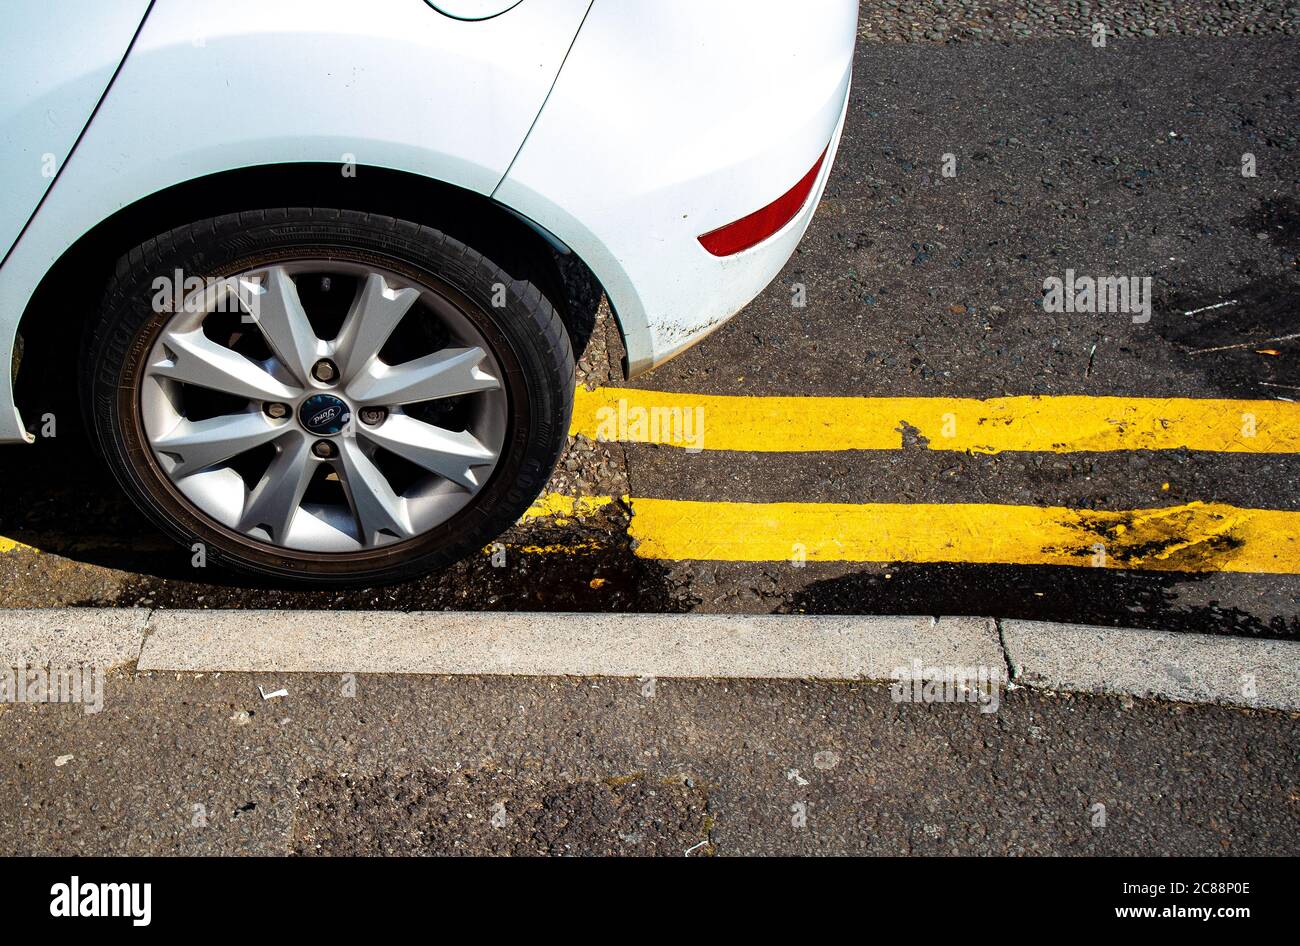 Car illegally parked on double yellow lines, Cardiff, Wales Stock Photo